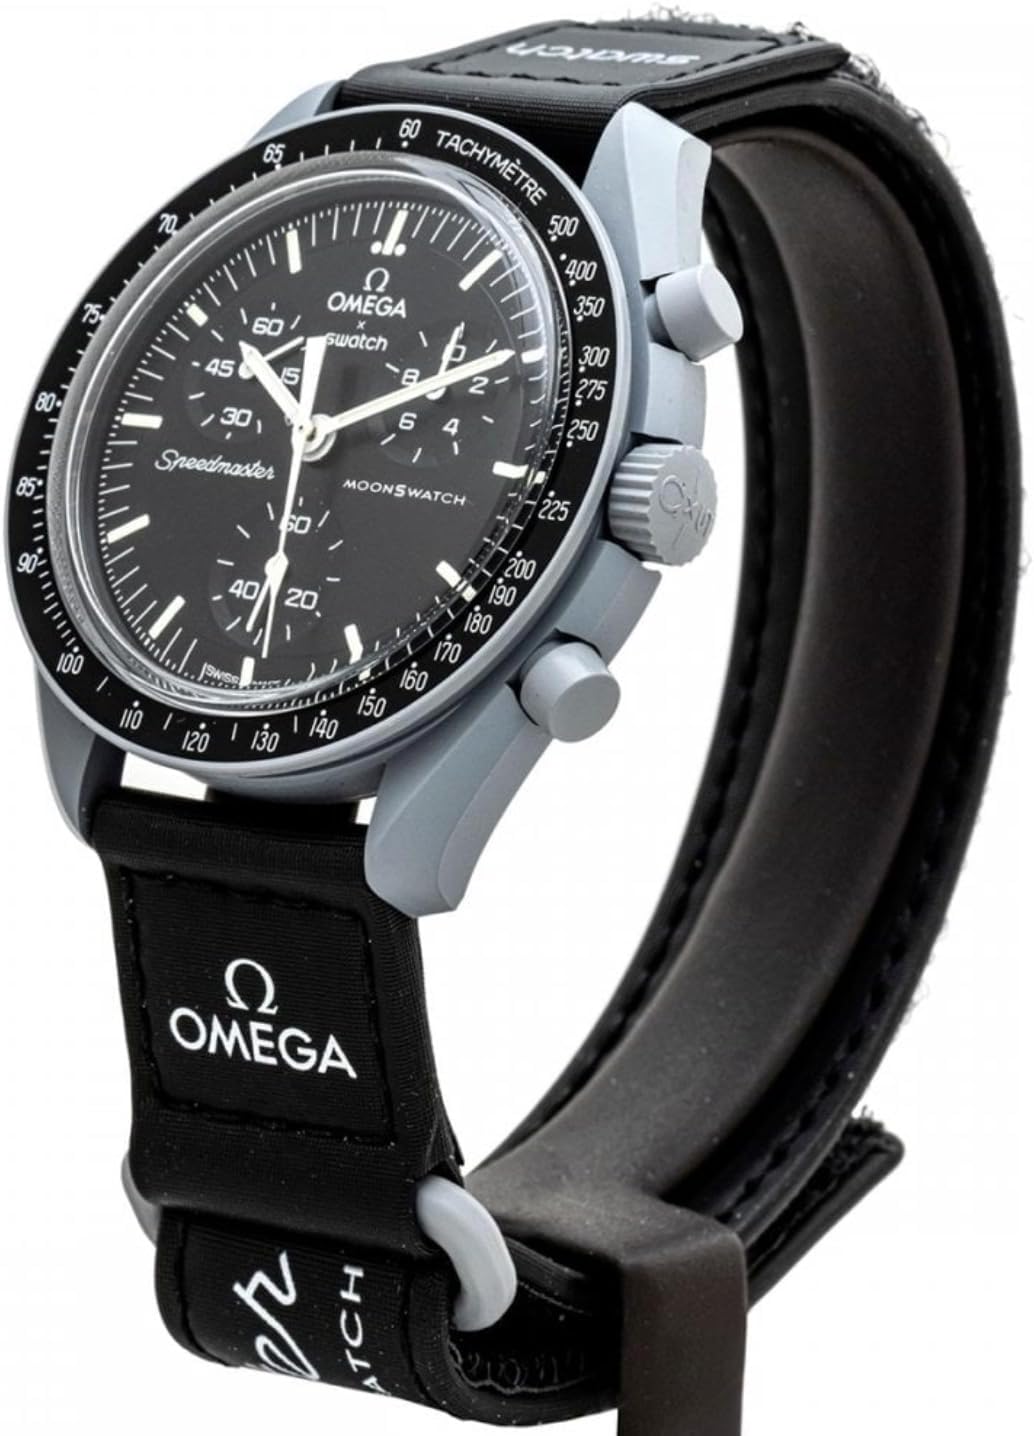 Omega x Swatch Moon Swatch Mission to The Moon Speedmaster Black - New, SO33M100